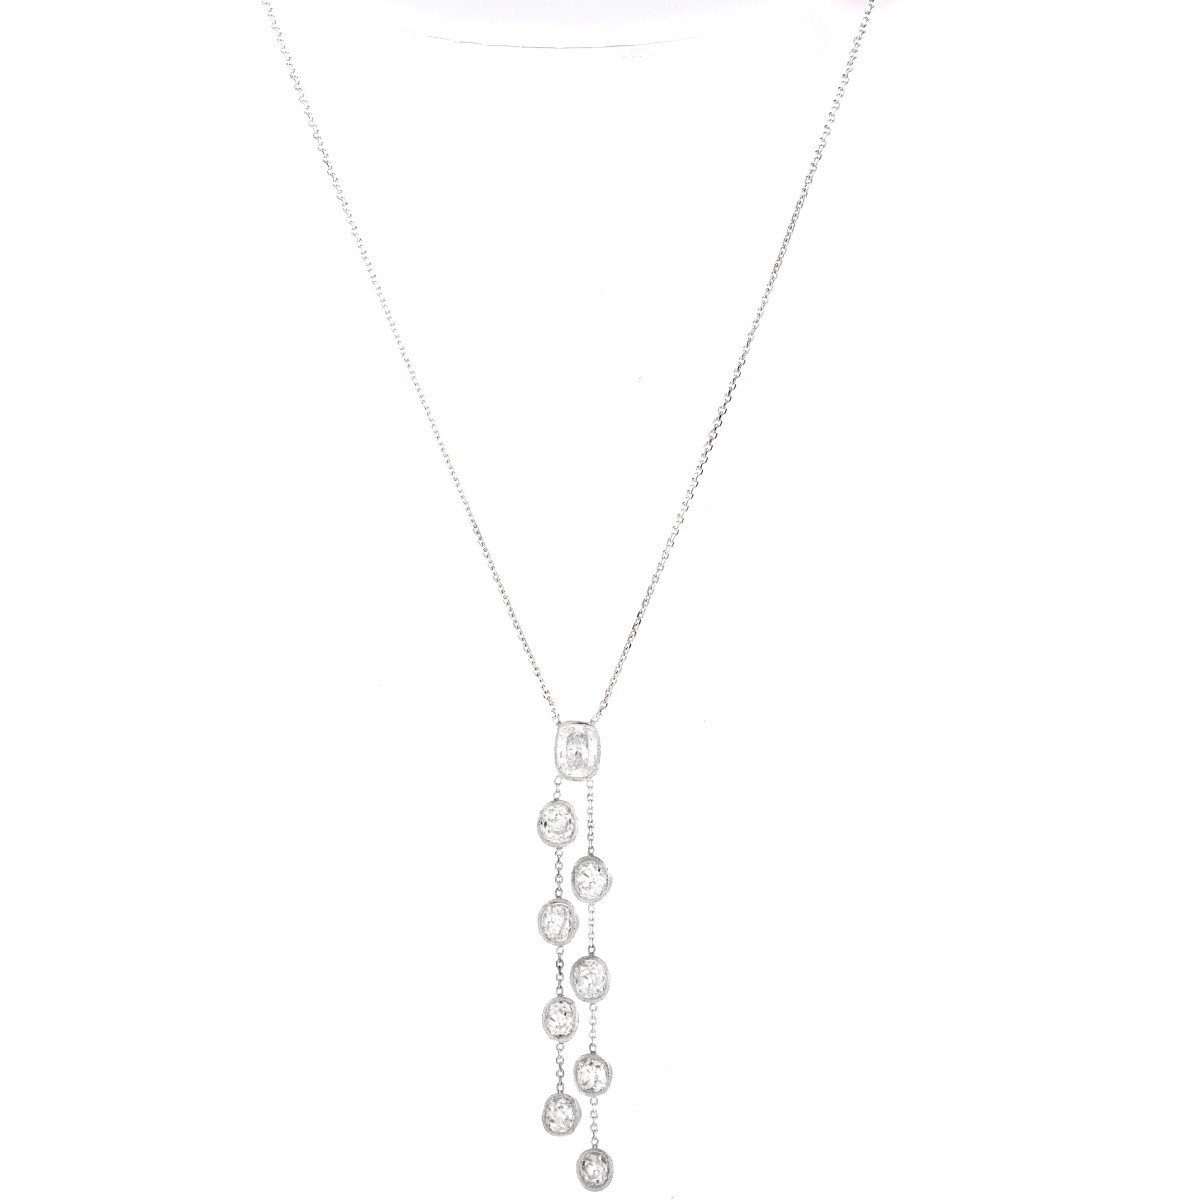 5.57ct TW Diamond and 14K Gold Dripping Necklace